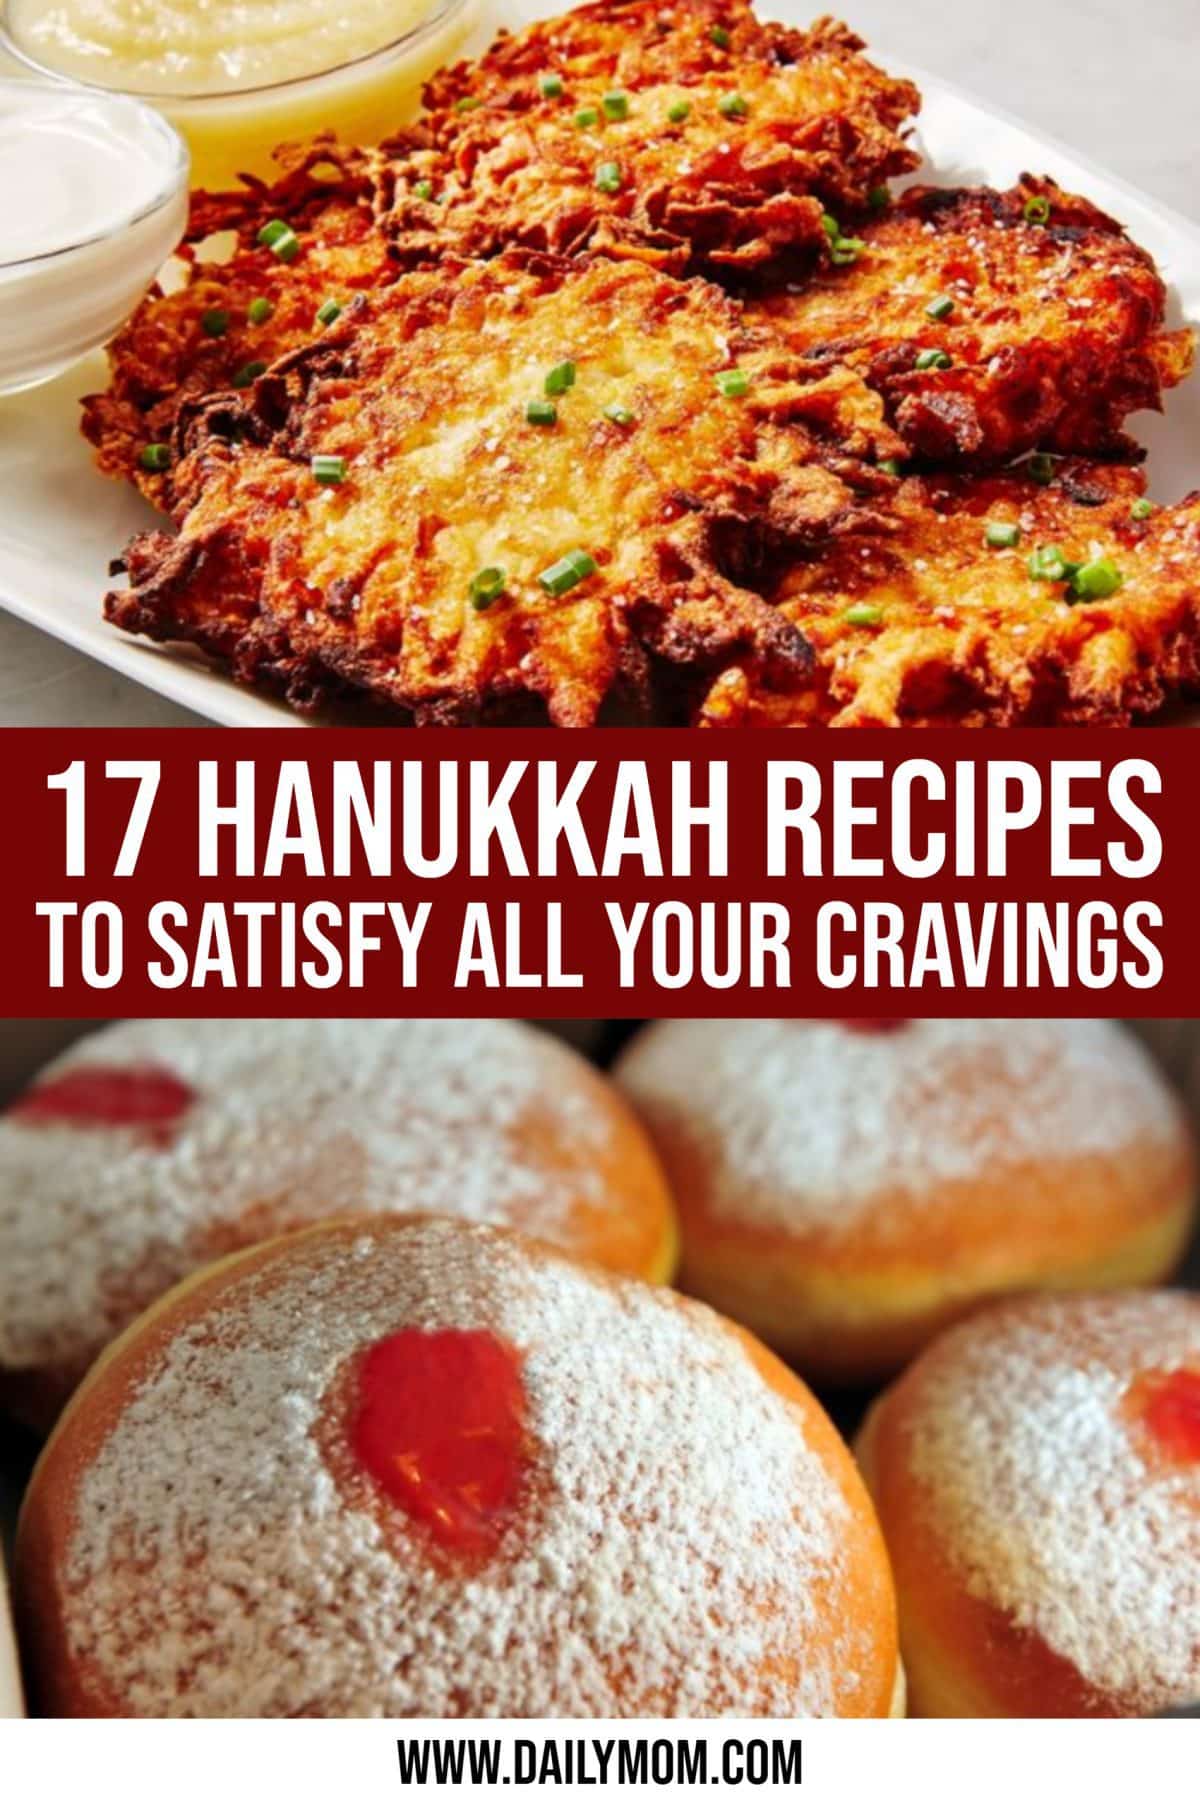 17 Hanukkah Food Recipes To Satisfy All Your Cravings